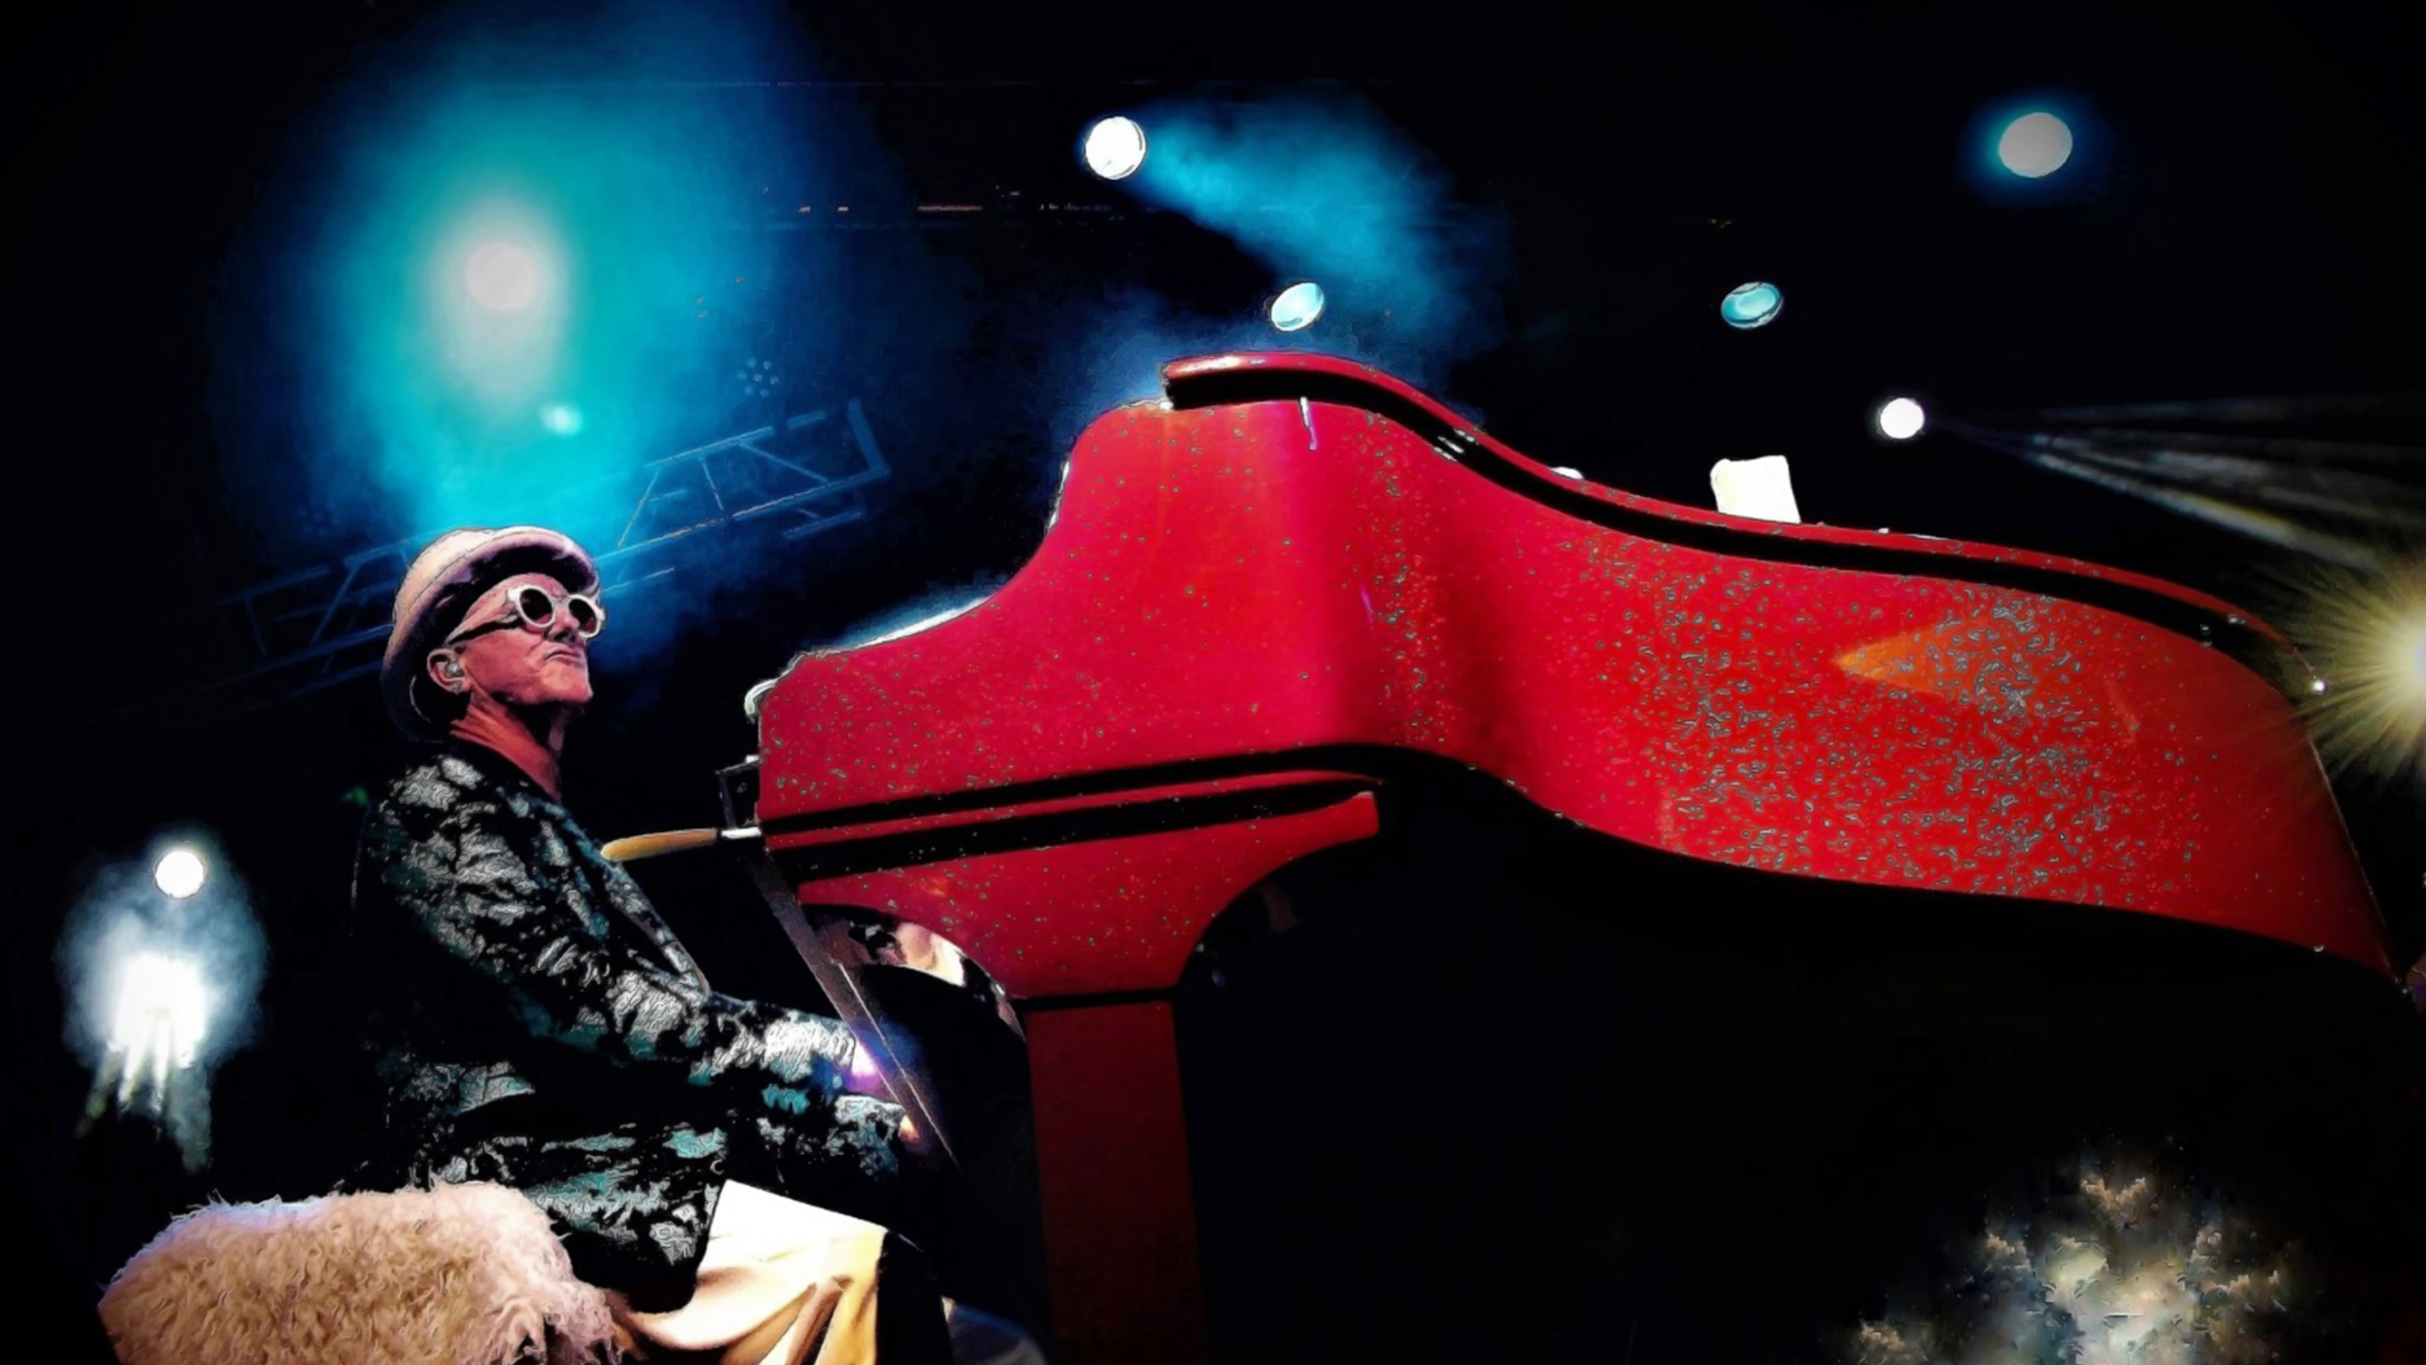 An Evening With: Elton Dan & The Rocket Band